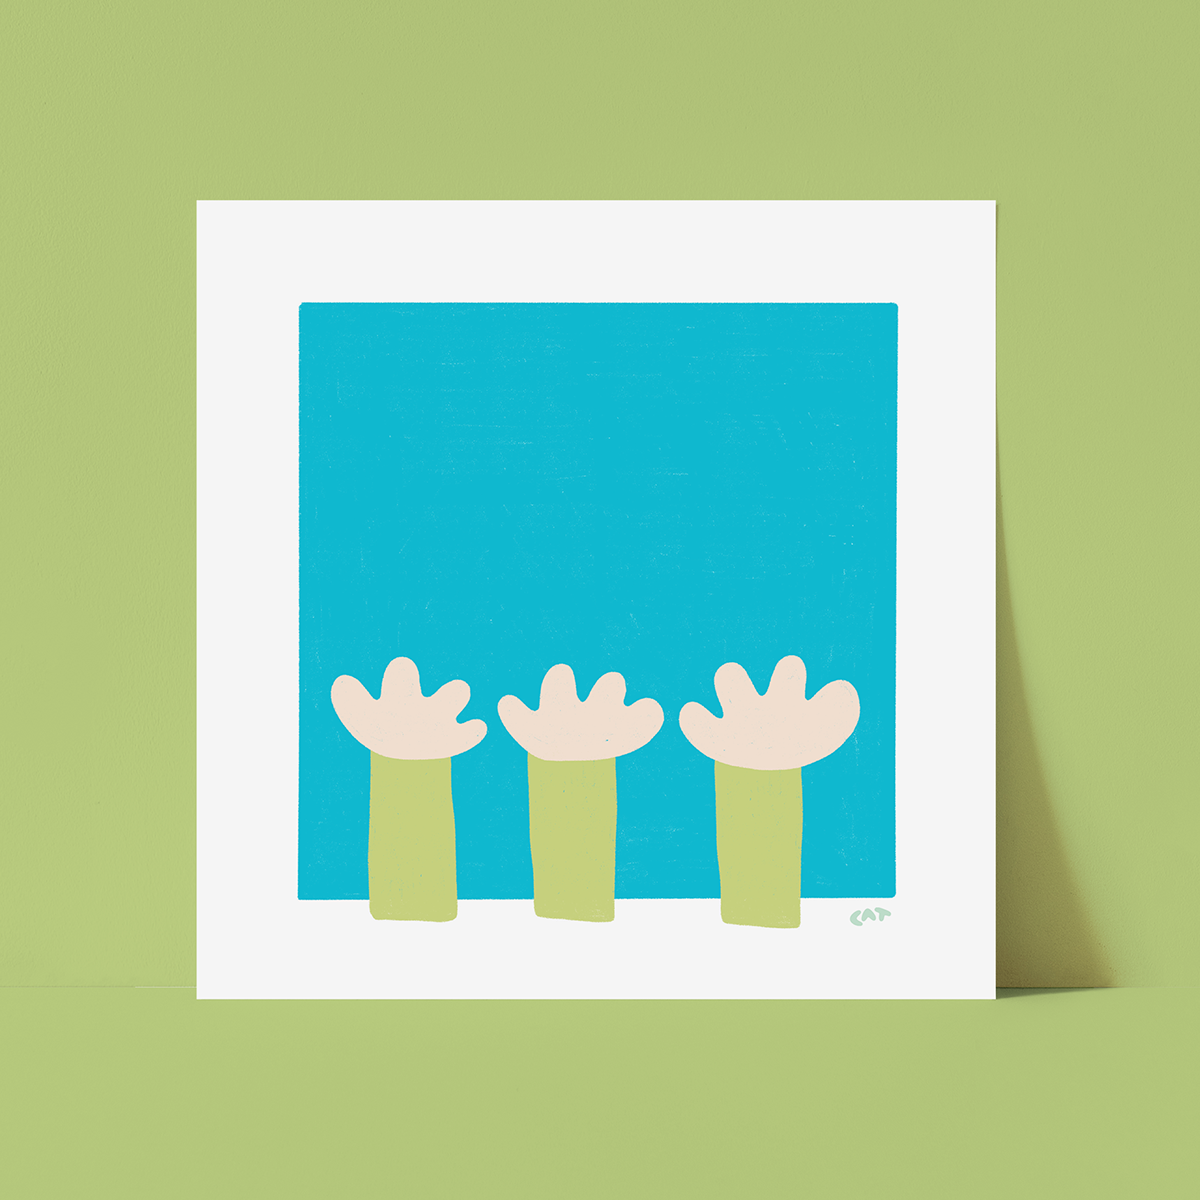 White unframed print of a blue square with green garden hose shapes on top of the square.